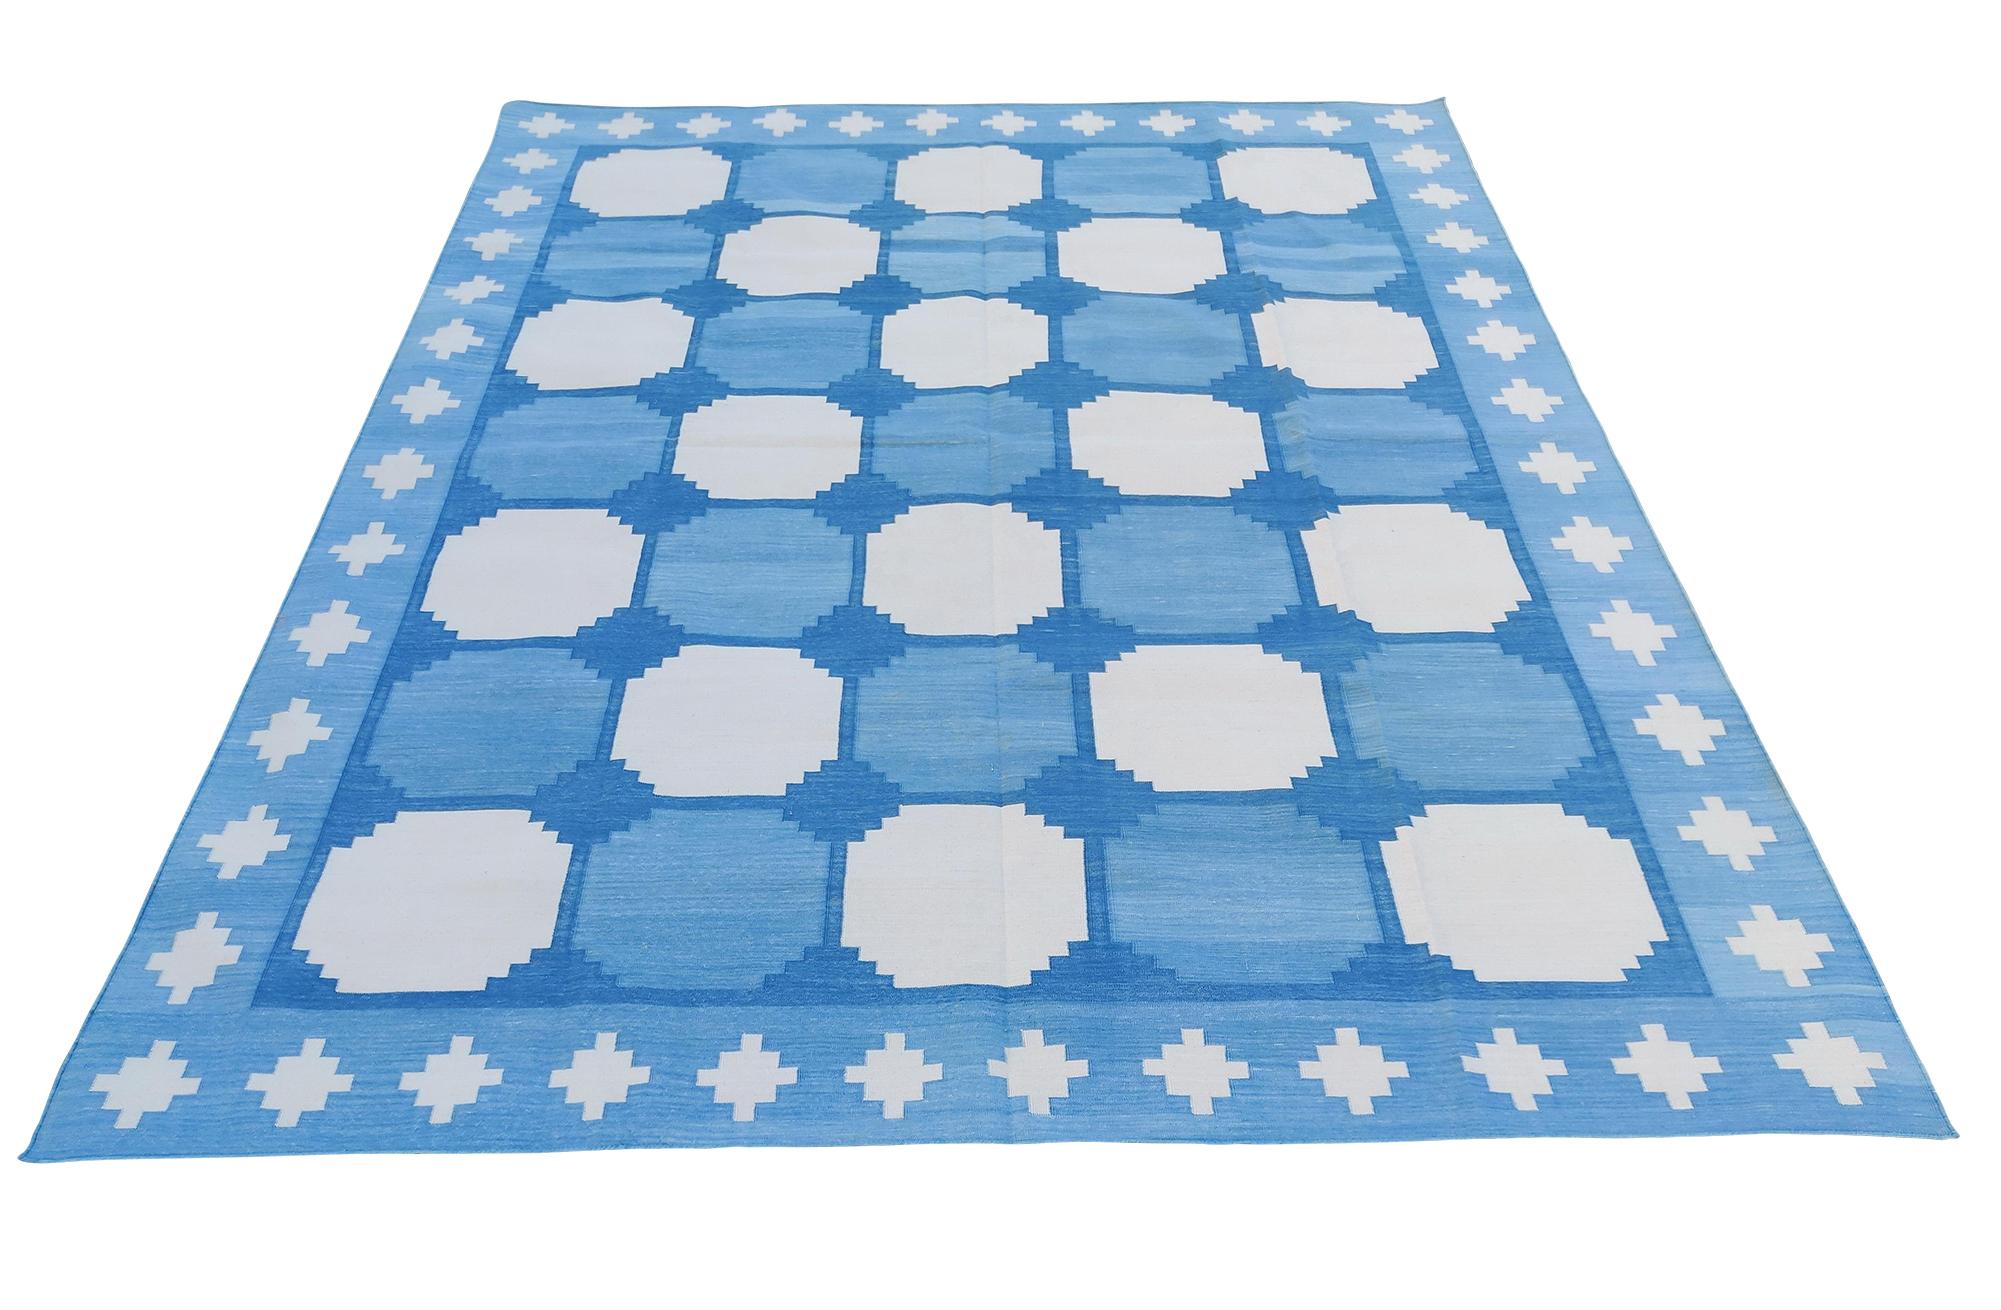 Cotton Natural Vegetable Dyed, Sky Blue And Cream Tile Patterned Indian Rug-6'x9'

These special flat-weave dhurries are hand-woven with 15 ply 100% cotton yarn. Due to the special manufacturing techniques used to create our rugs, the size and color